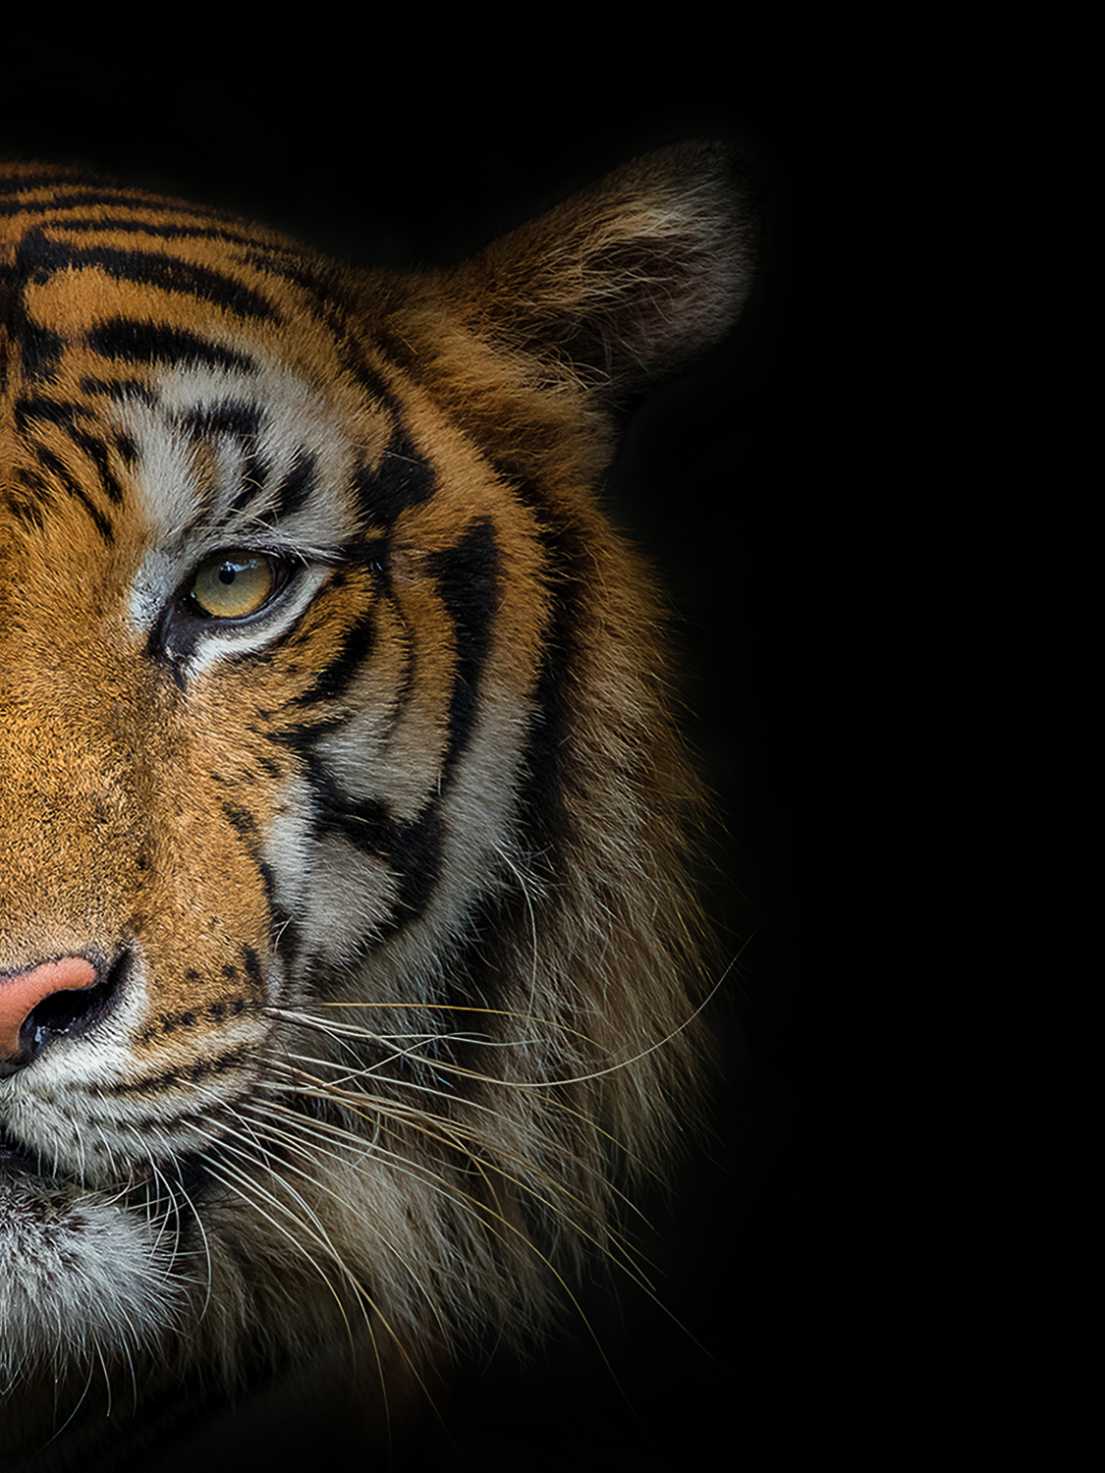 Tiger Face Photography Print – ArtSmiley